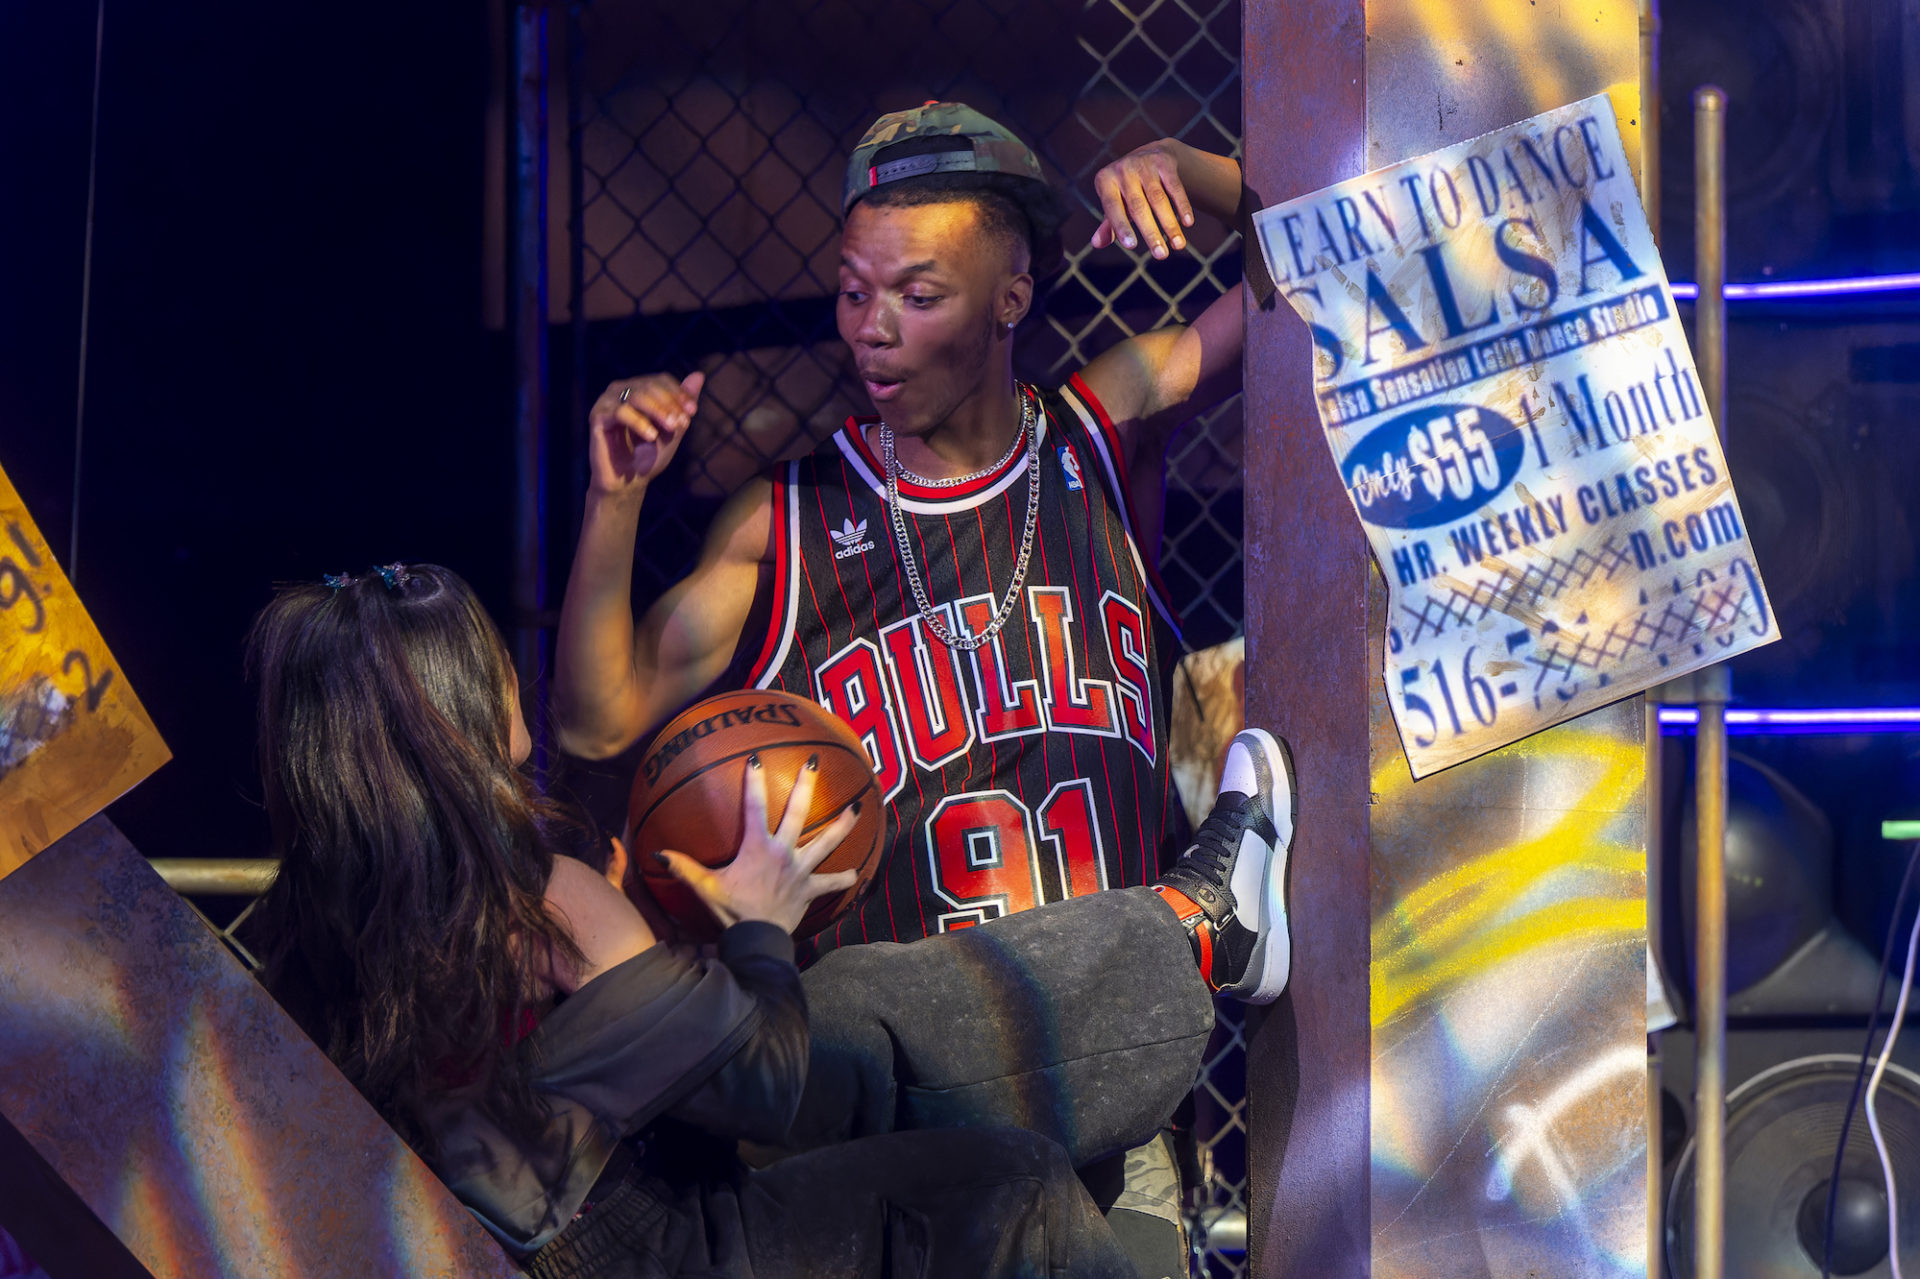 A scene from the Realness: a stage with exposed brick and posters hanging; a Black man in a Bulls jersey looks surprised while a woman holds a basketball